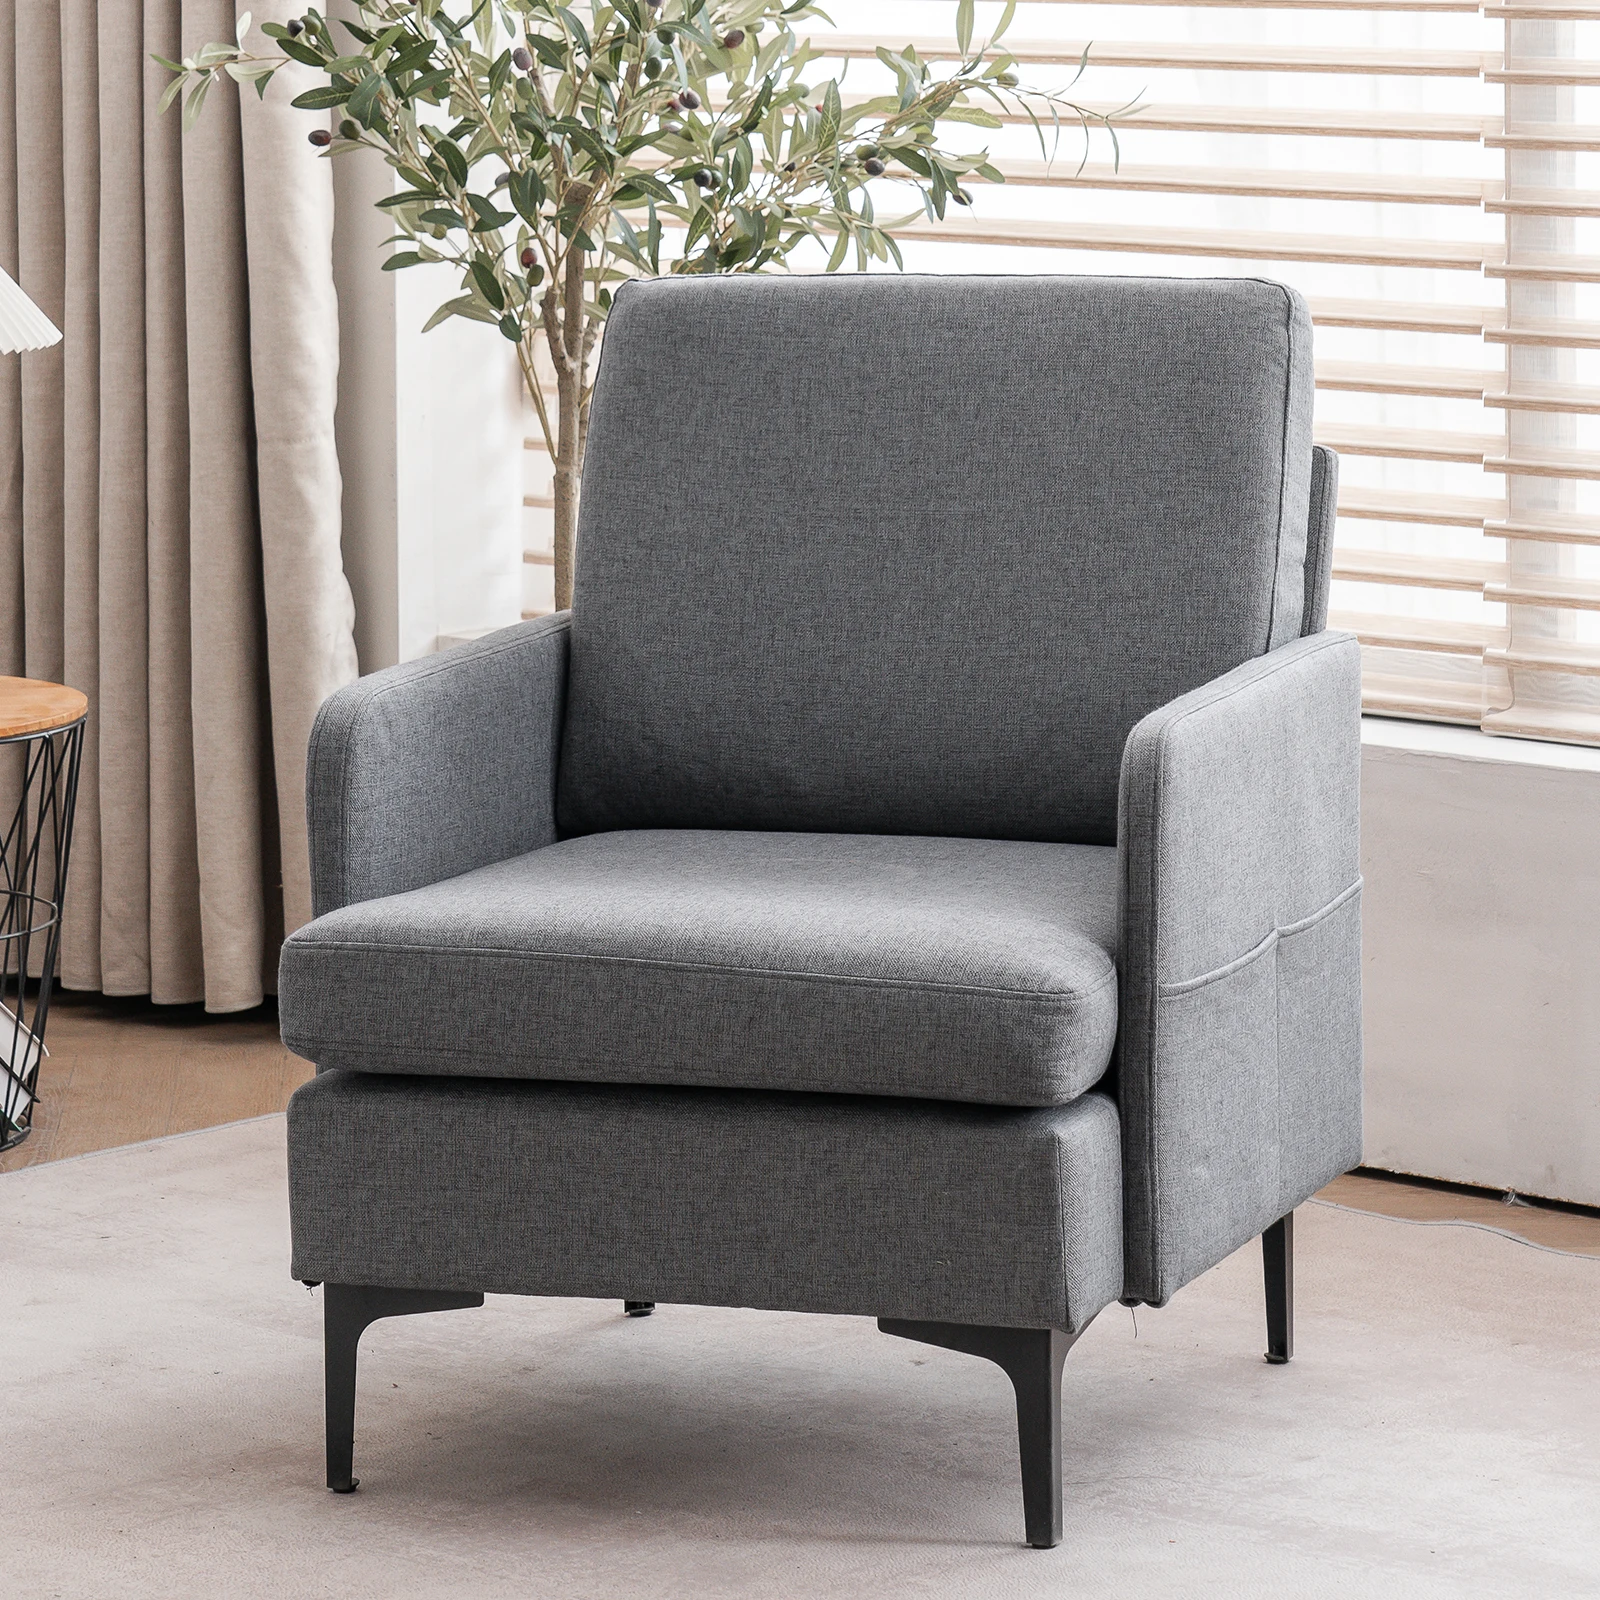 

Lounge Chair, Comfy Single Sofa Accent Chair for Bedroom Living Room Guestroom, Dark Grey SIZE 31.1*26.77*34.65 inch